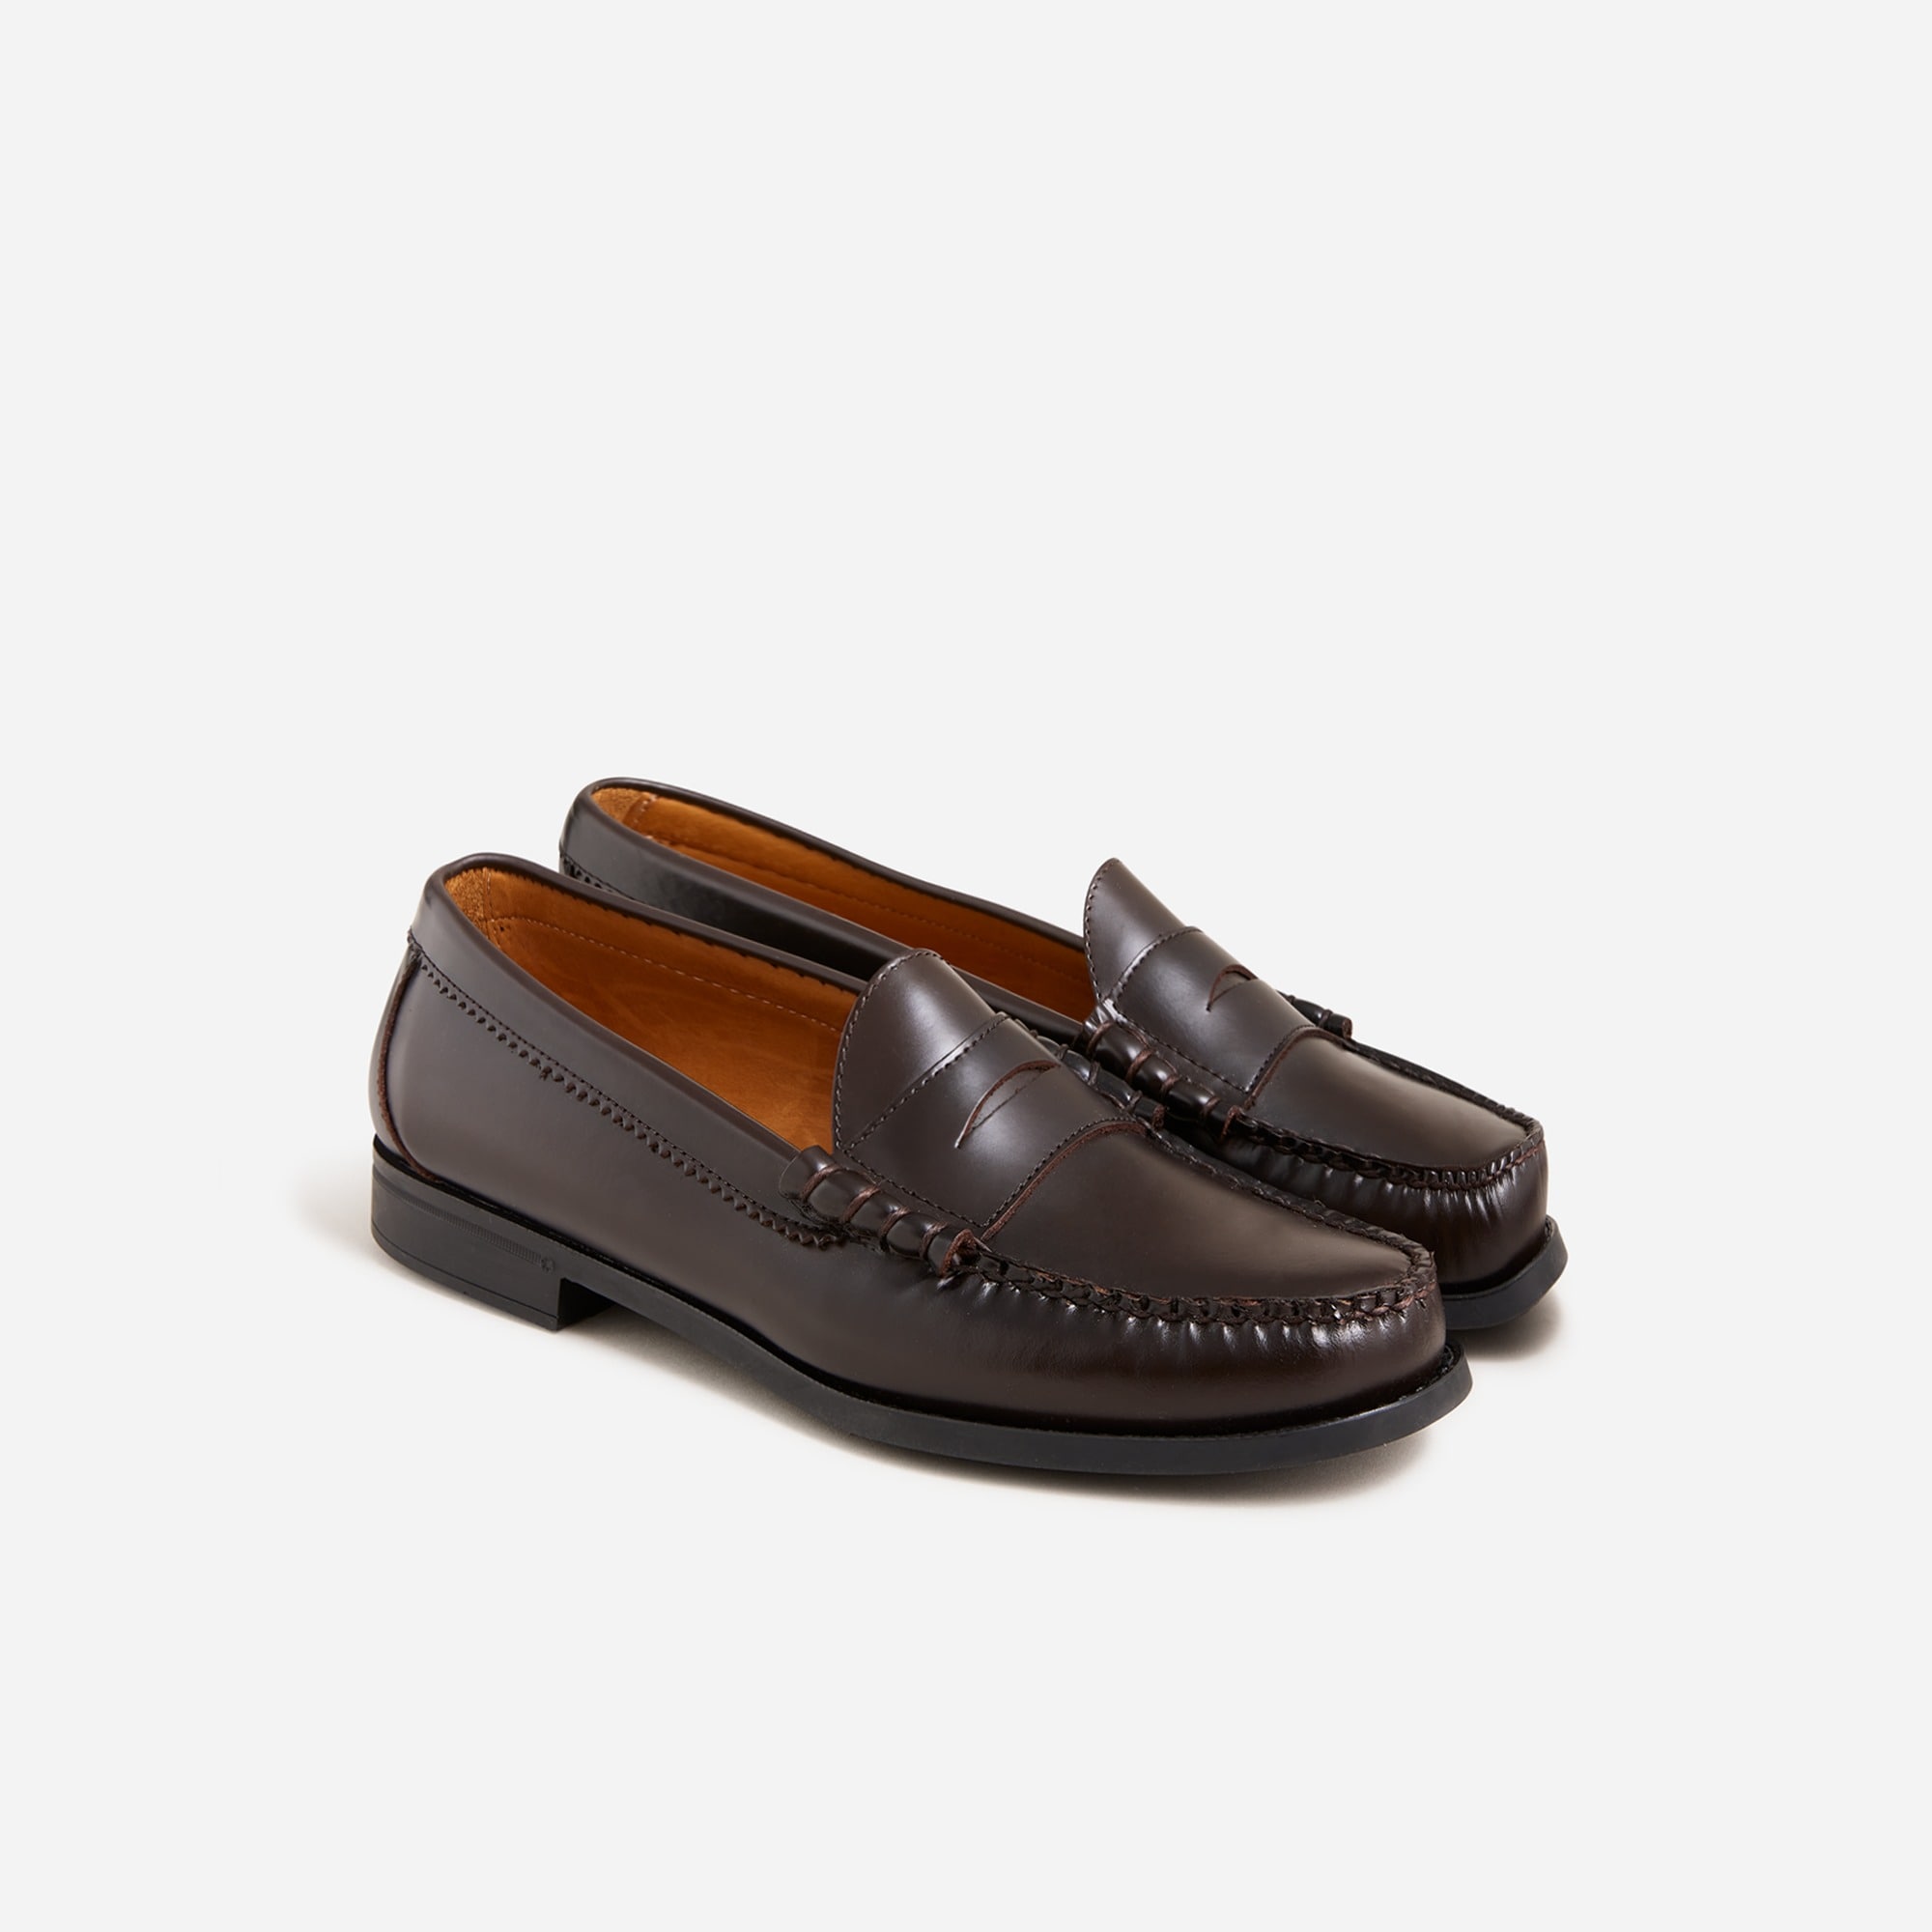  Camden loafers in leather